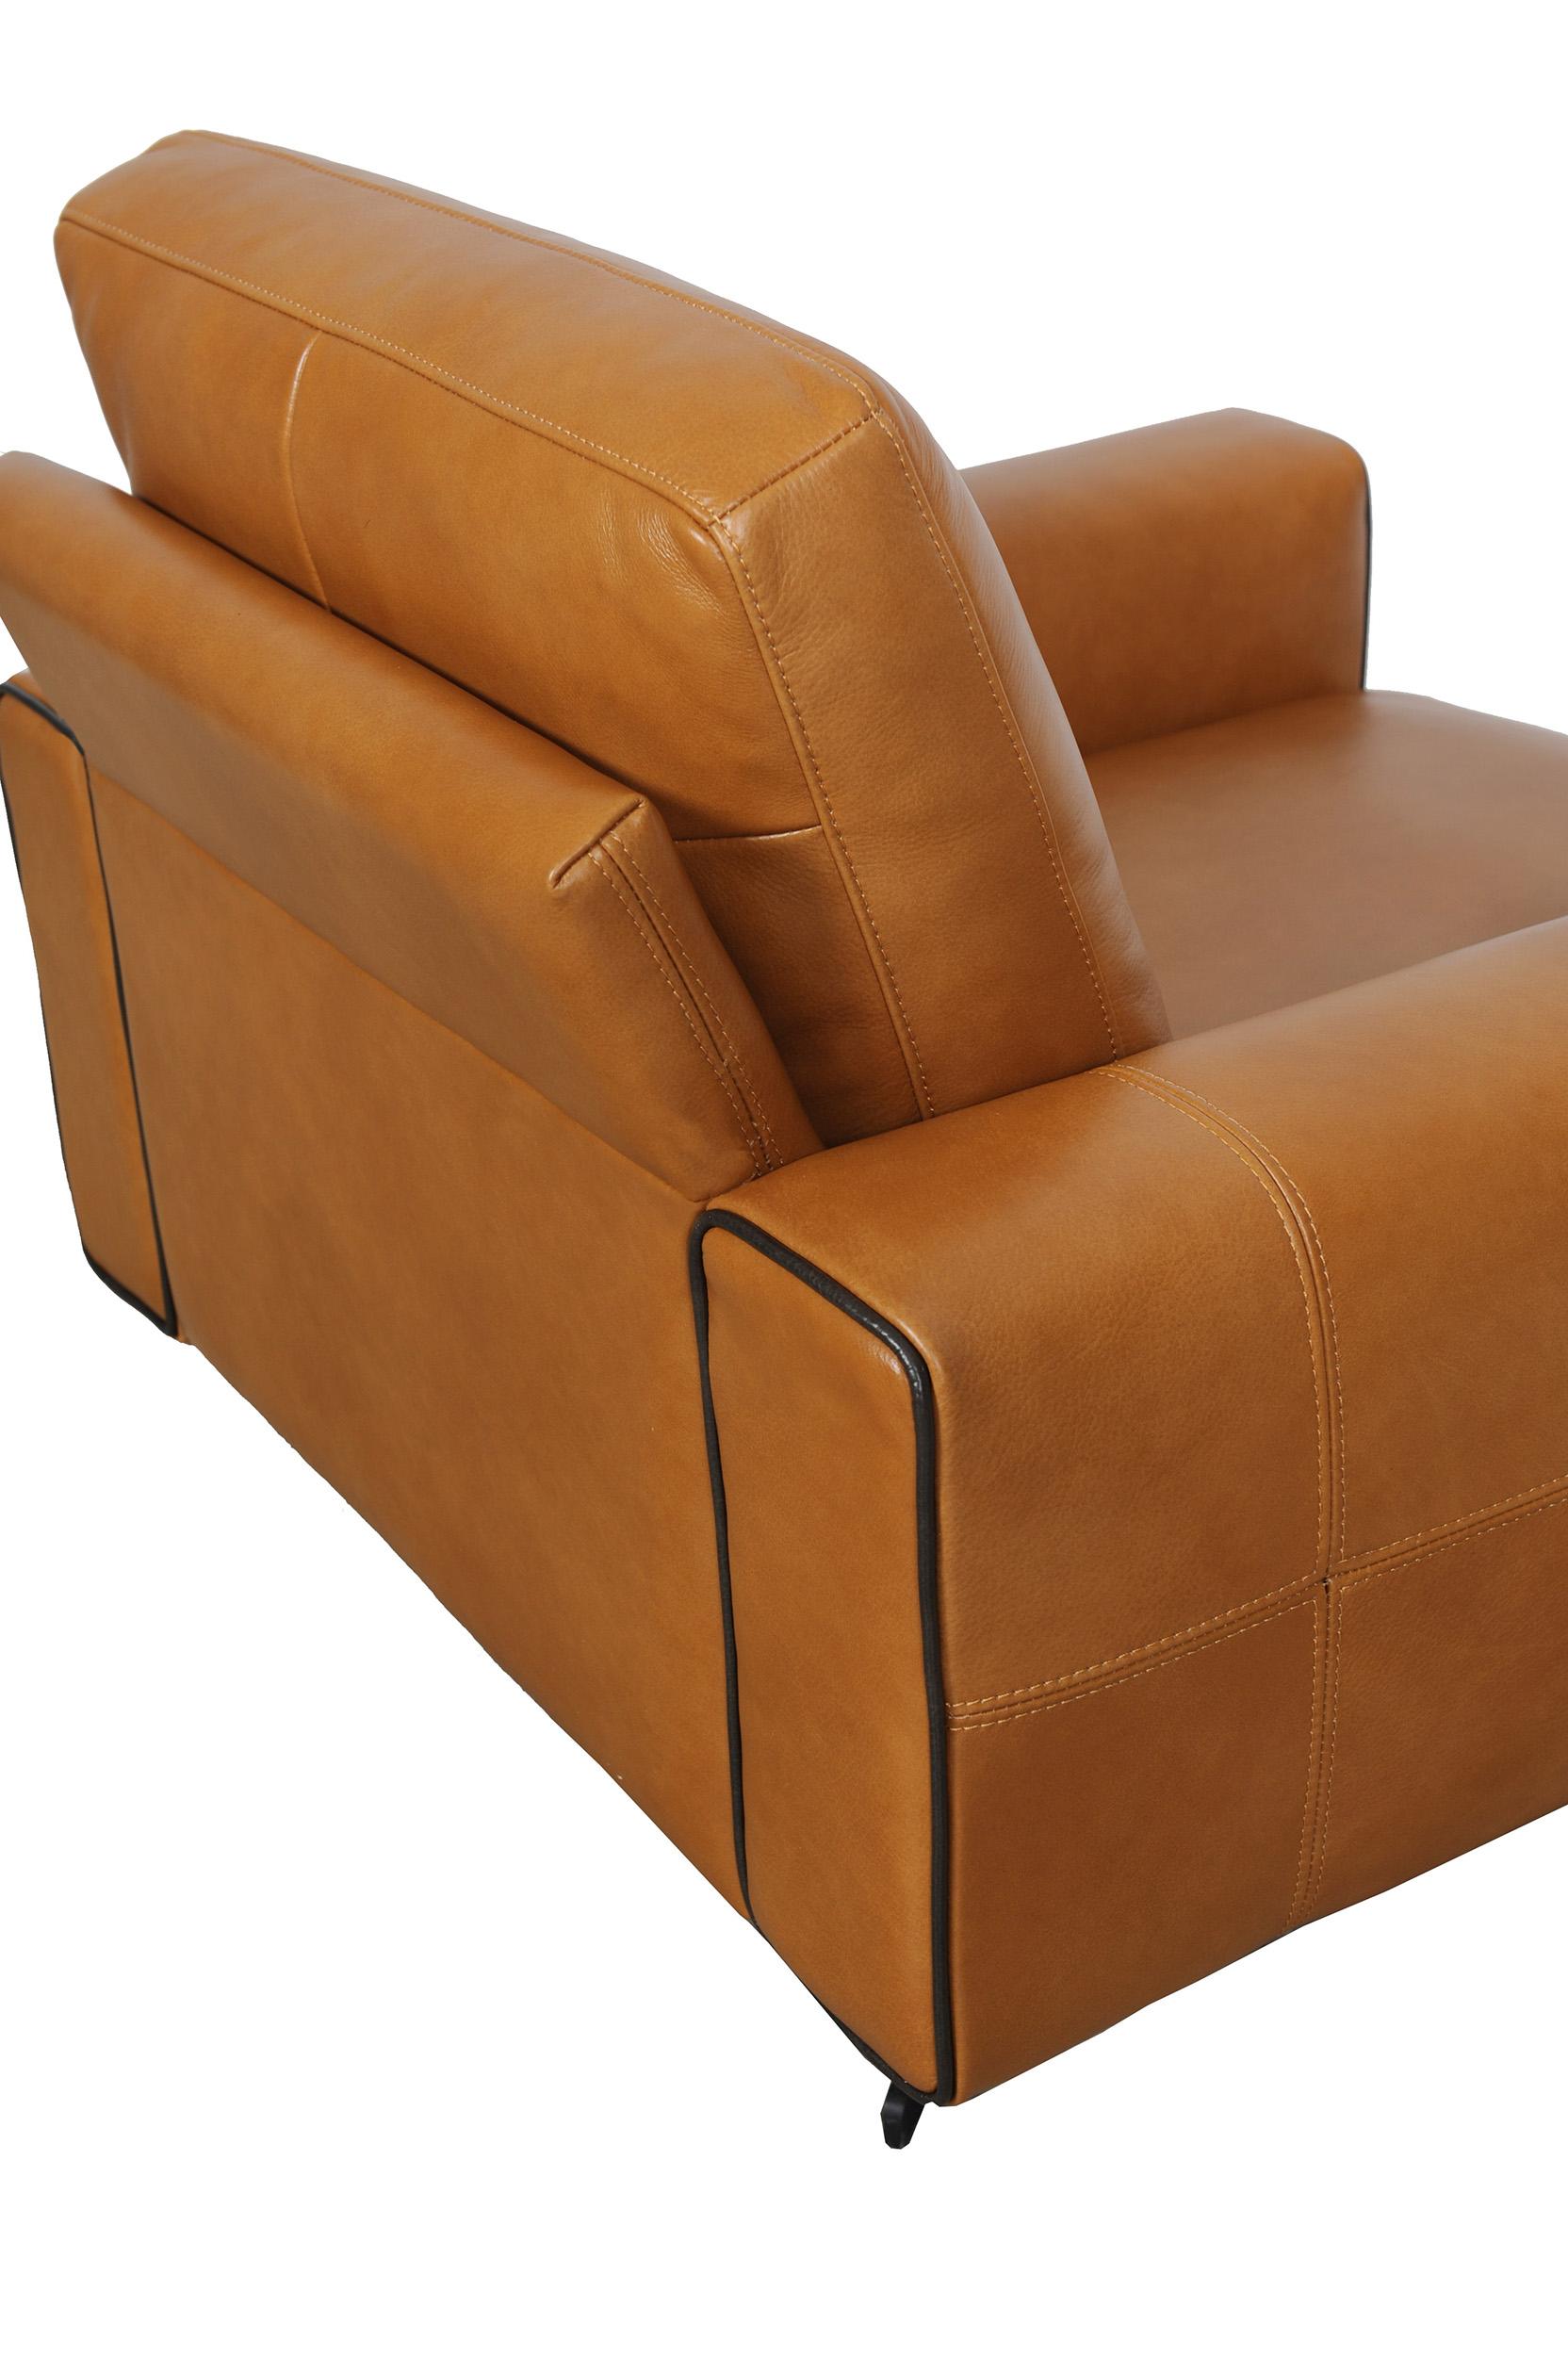 

                    
Moroni Colette 593 Arm Chair Tan Full Leather Purchase 
